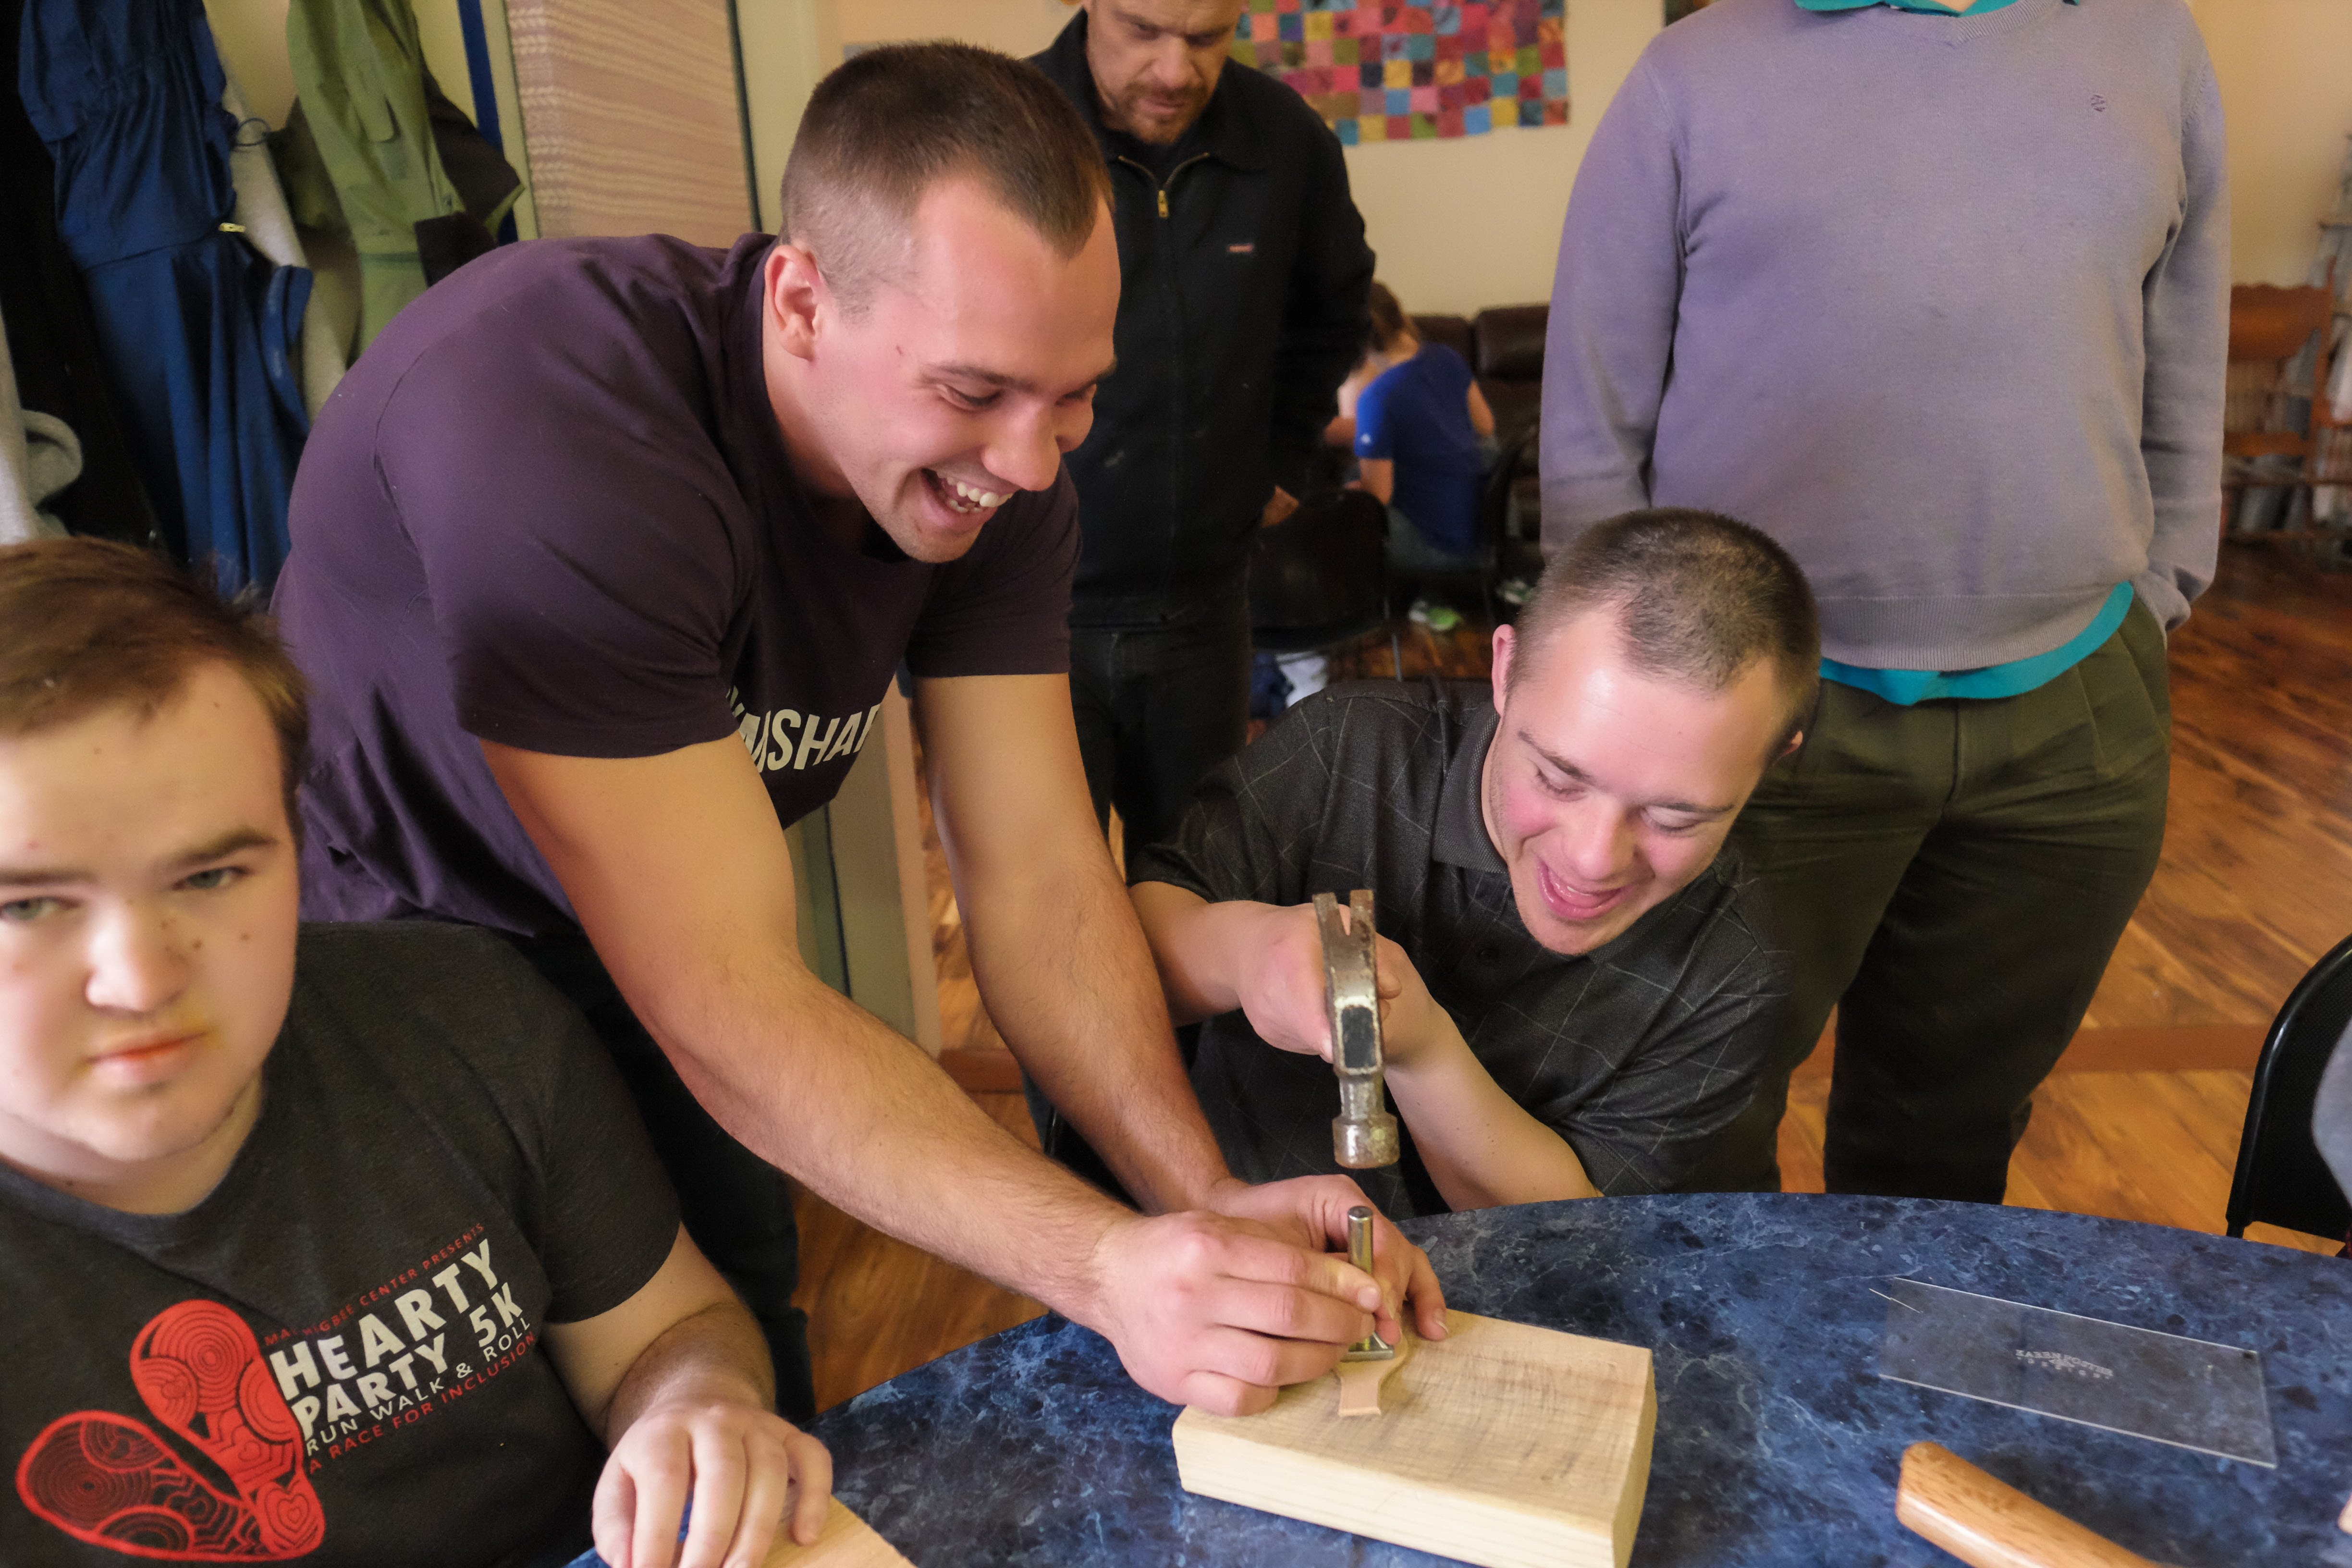 MHC members smile with volunteer while learning leather stamping